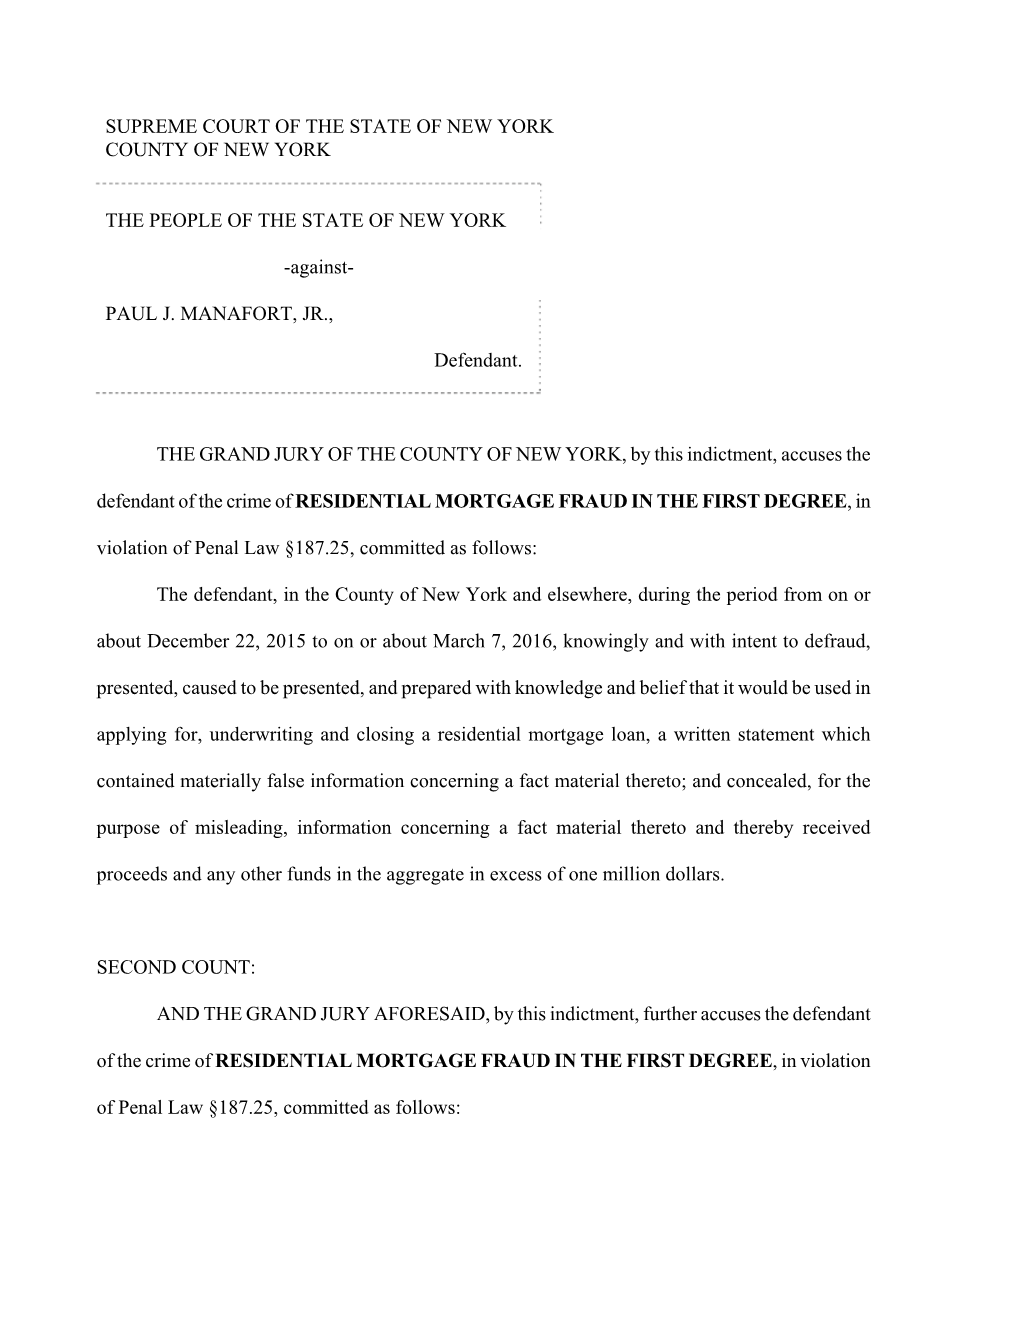 Indictment, Accuses the Defendant of the Crime of RESIDENTIAL MORTGAGE FRAUD in the FIRST DEGREE, in Violation of Penal Law §187.25, Committed As Follows